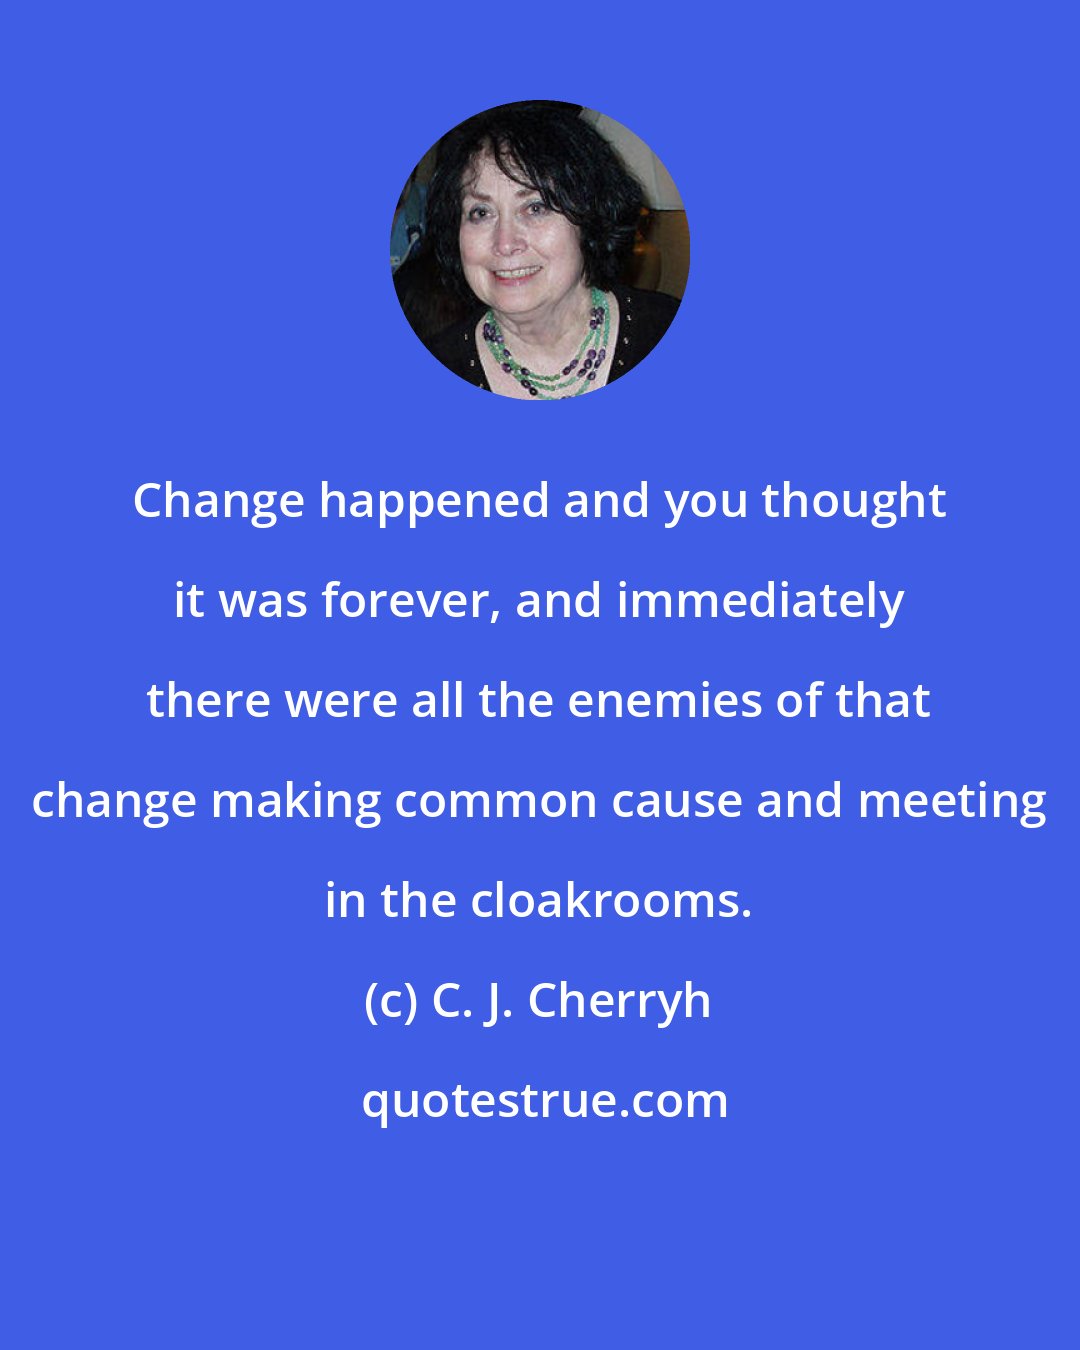 C. J. Cherryh: Change happened and you thought it was forever, and immediately there were all the enemies of that change making common cause and meeting in the cloakrooms.